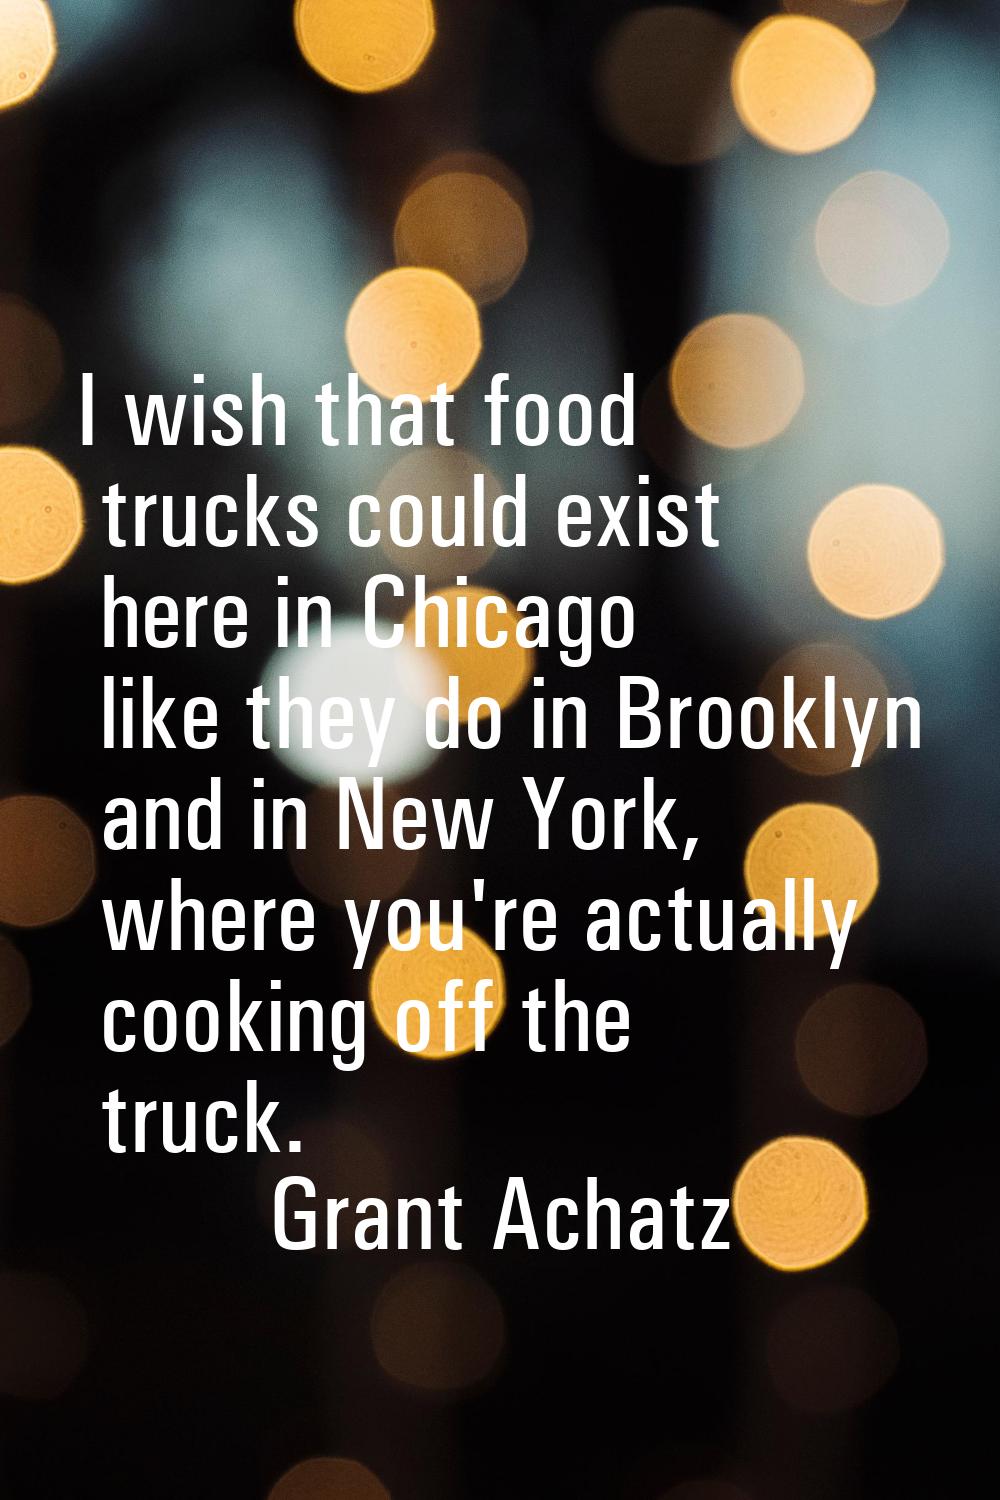 I wish that food trucks could exist here in Chicago like they do in Brooklyn and in New York, where